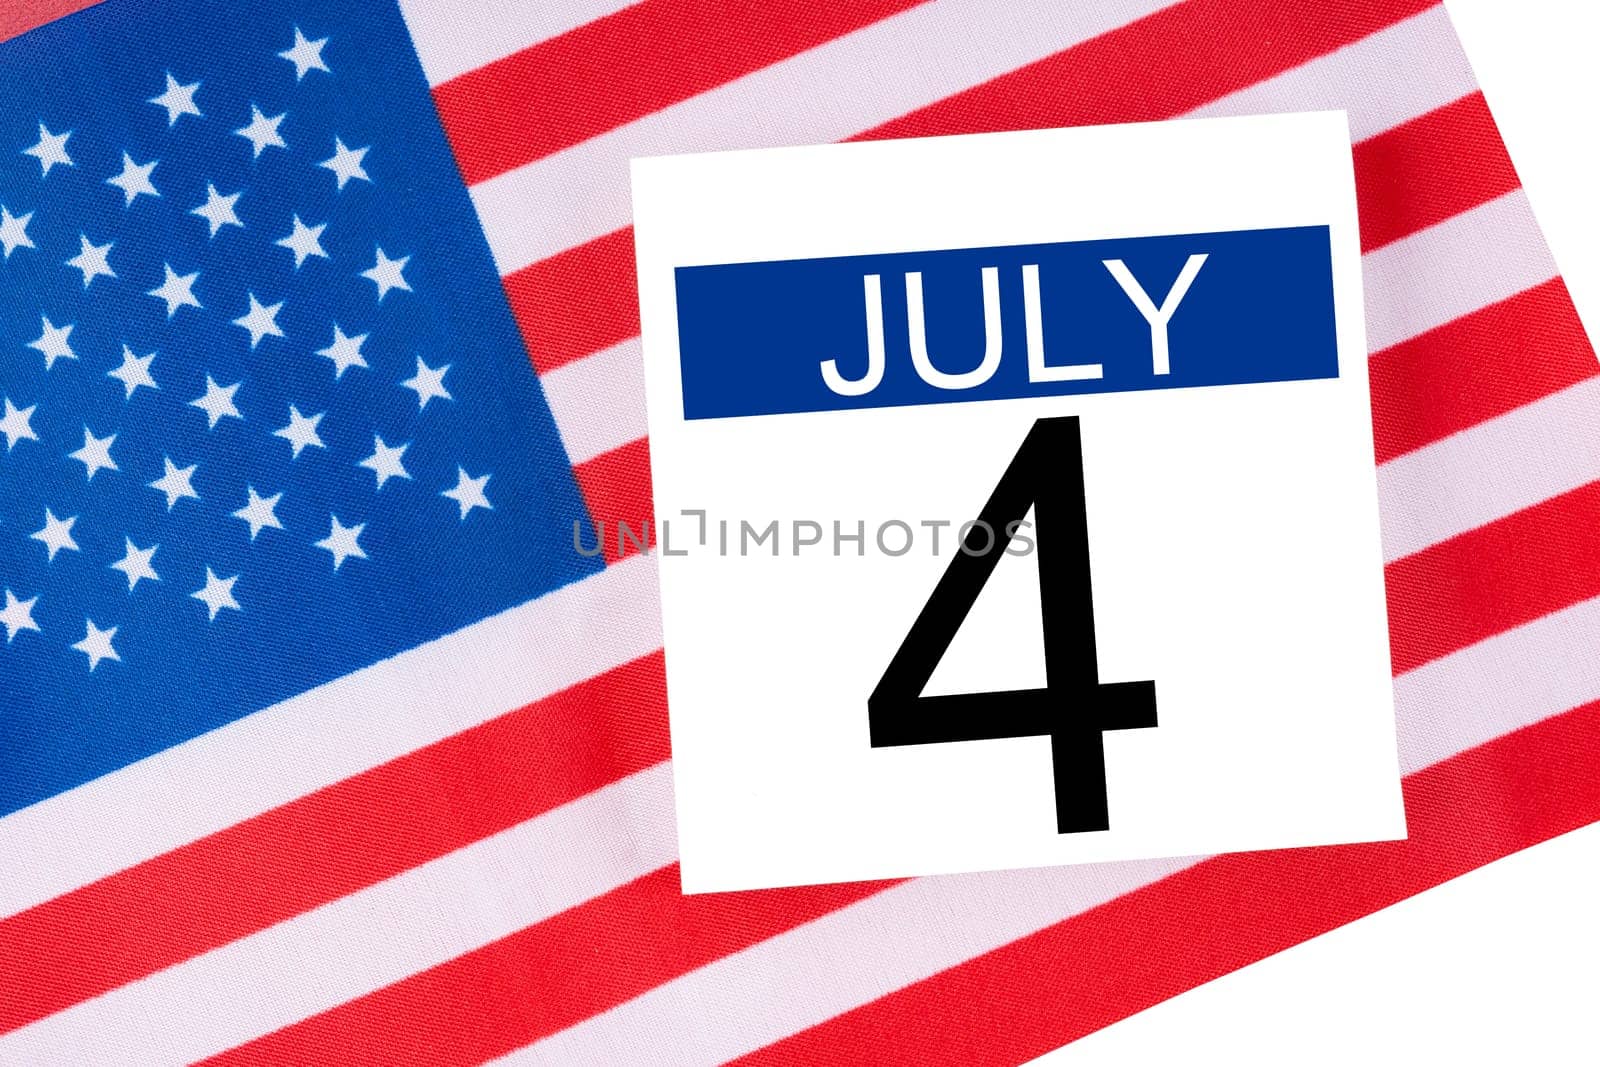 The 4 th July calendar with part of an American flag on white background.USA Independence Day date. by Gamjai